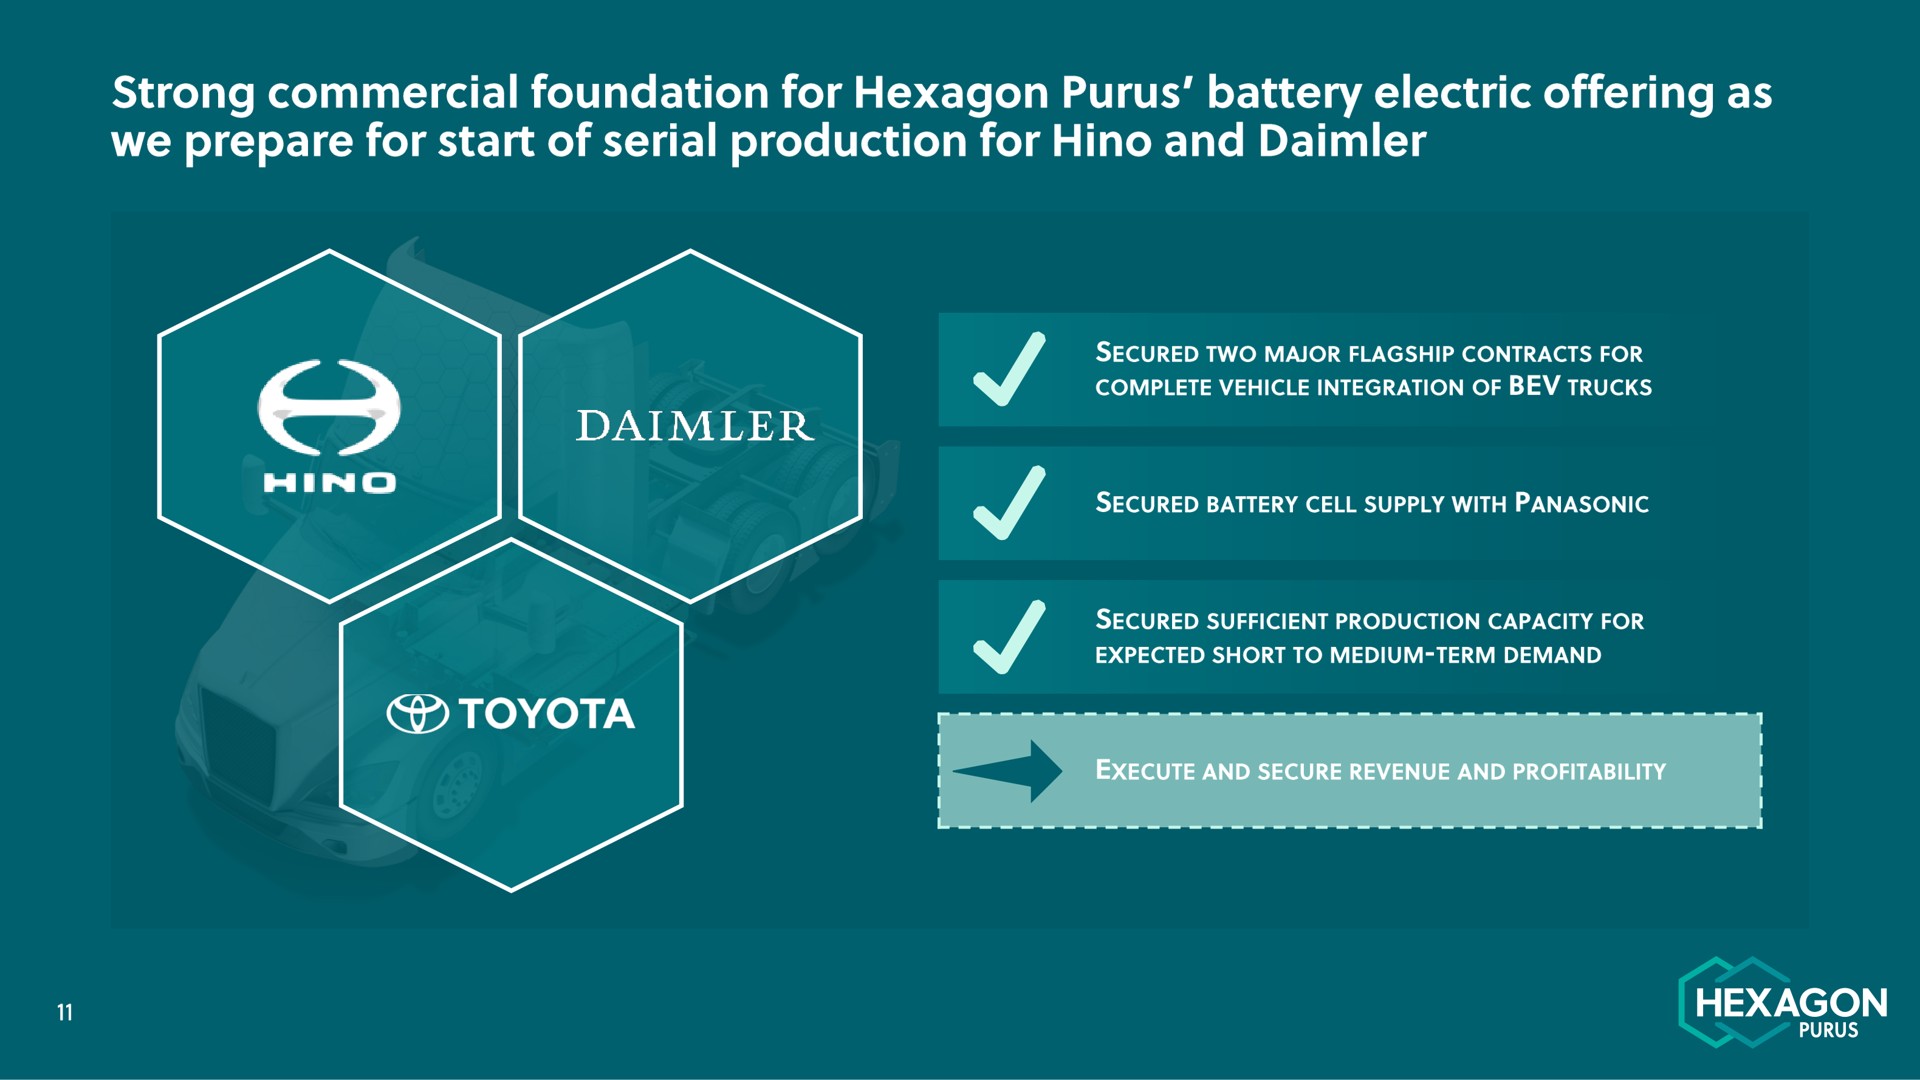 strong commercial foundation for hexagon battery electric offering as we prepare for start of serial production for and | Hexagon Purus